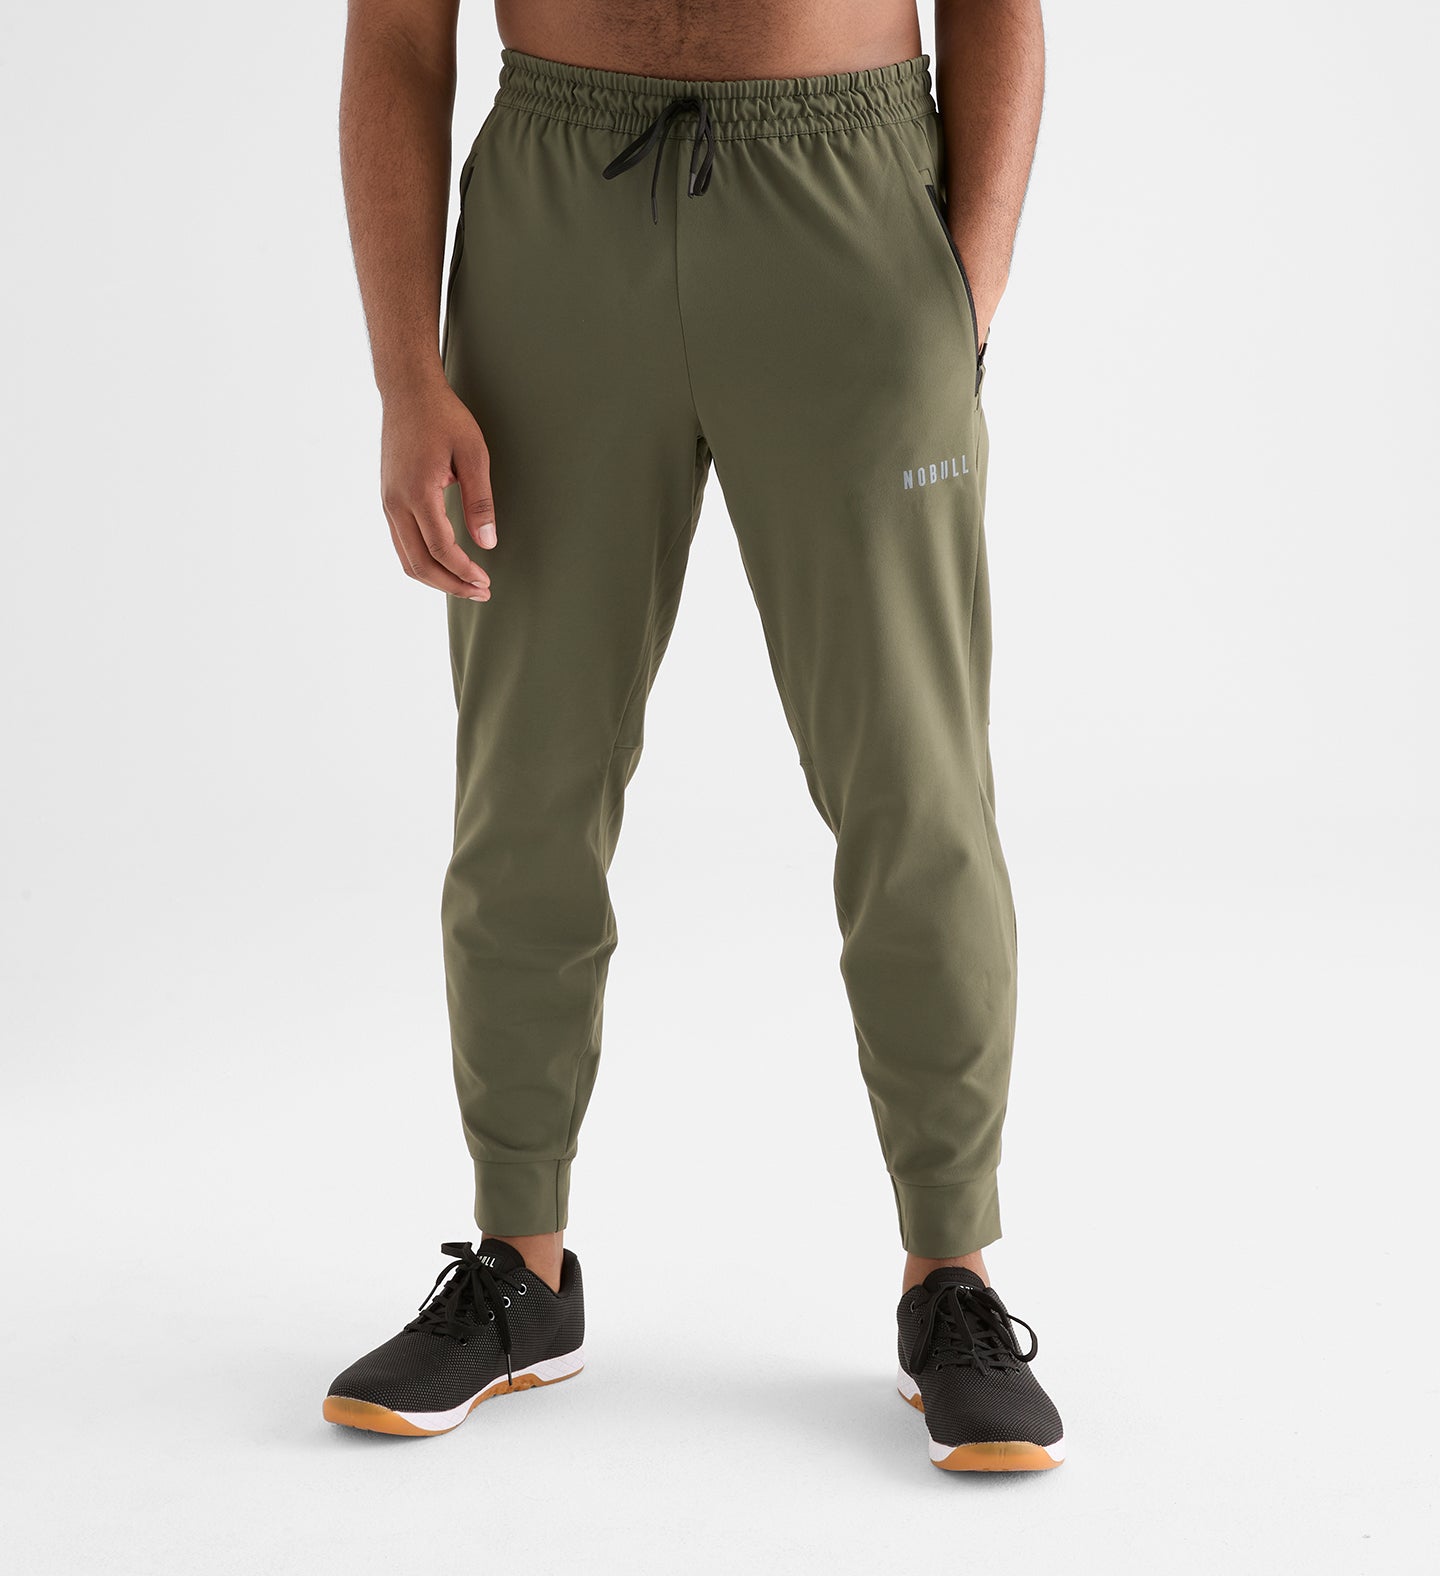 Gym Shark Fitted Sweatpants Bodybuilding - Green